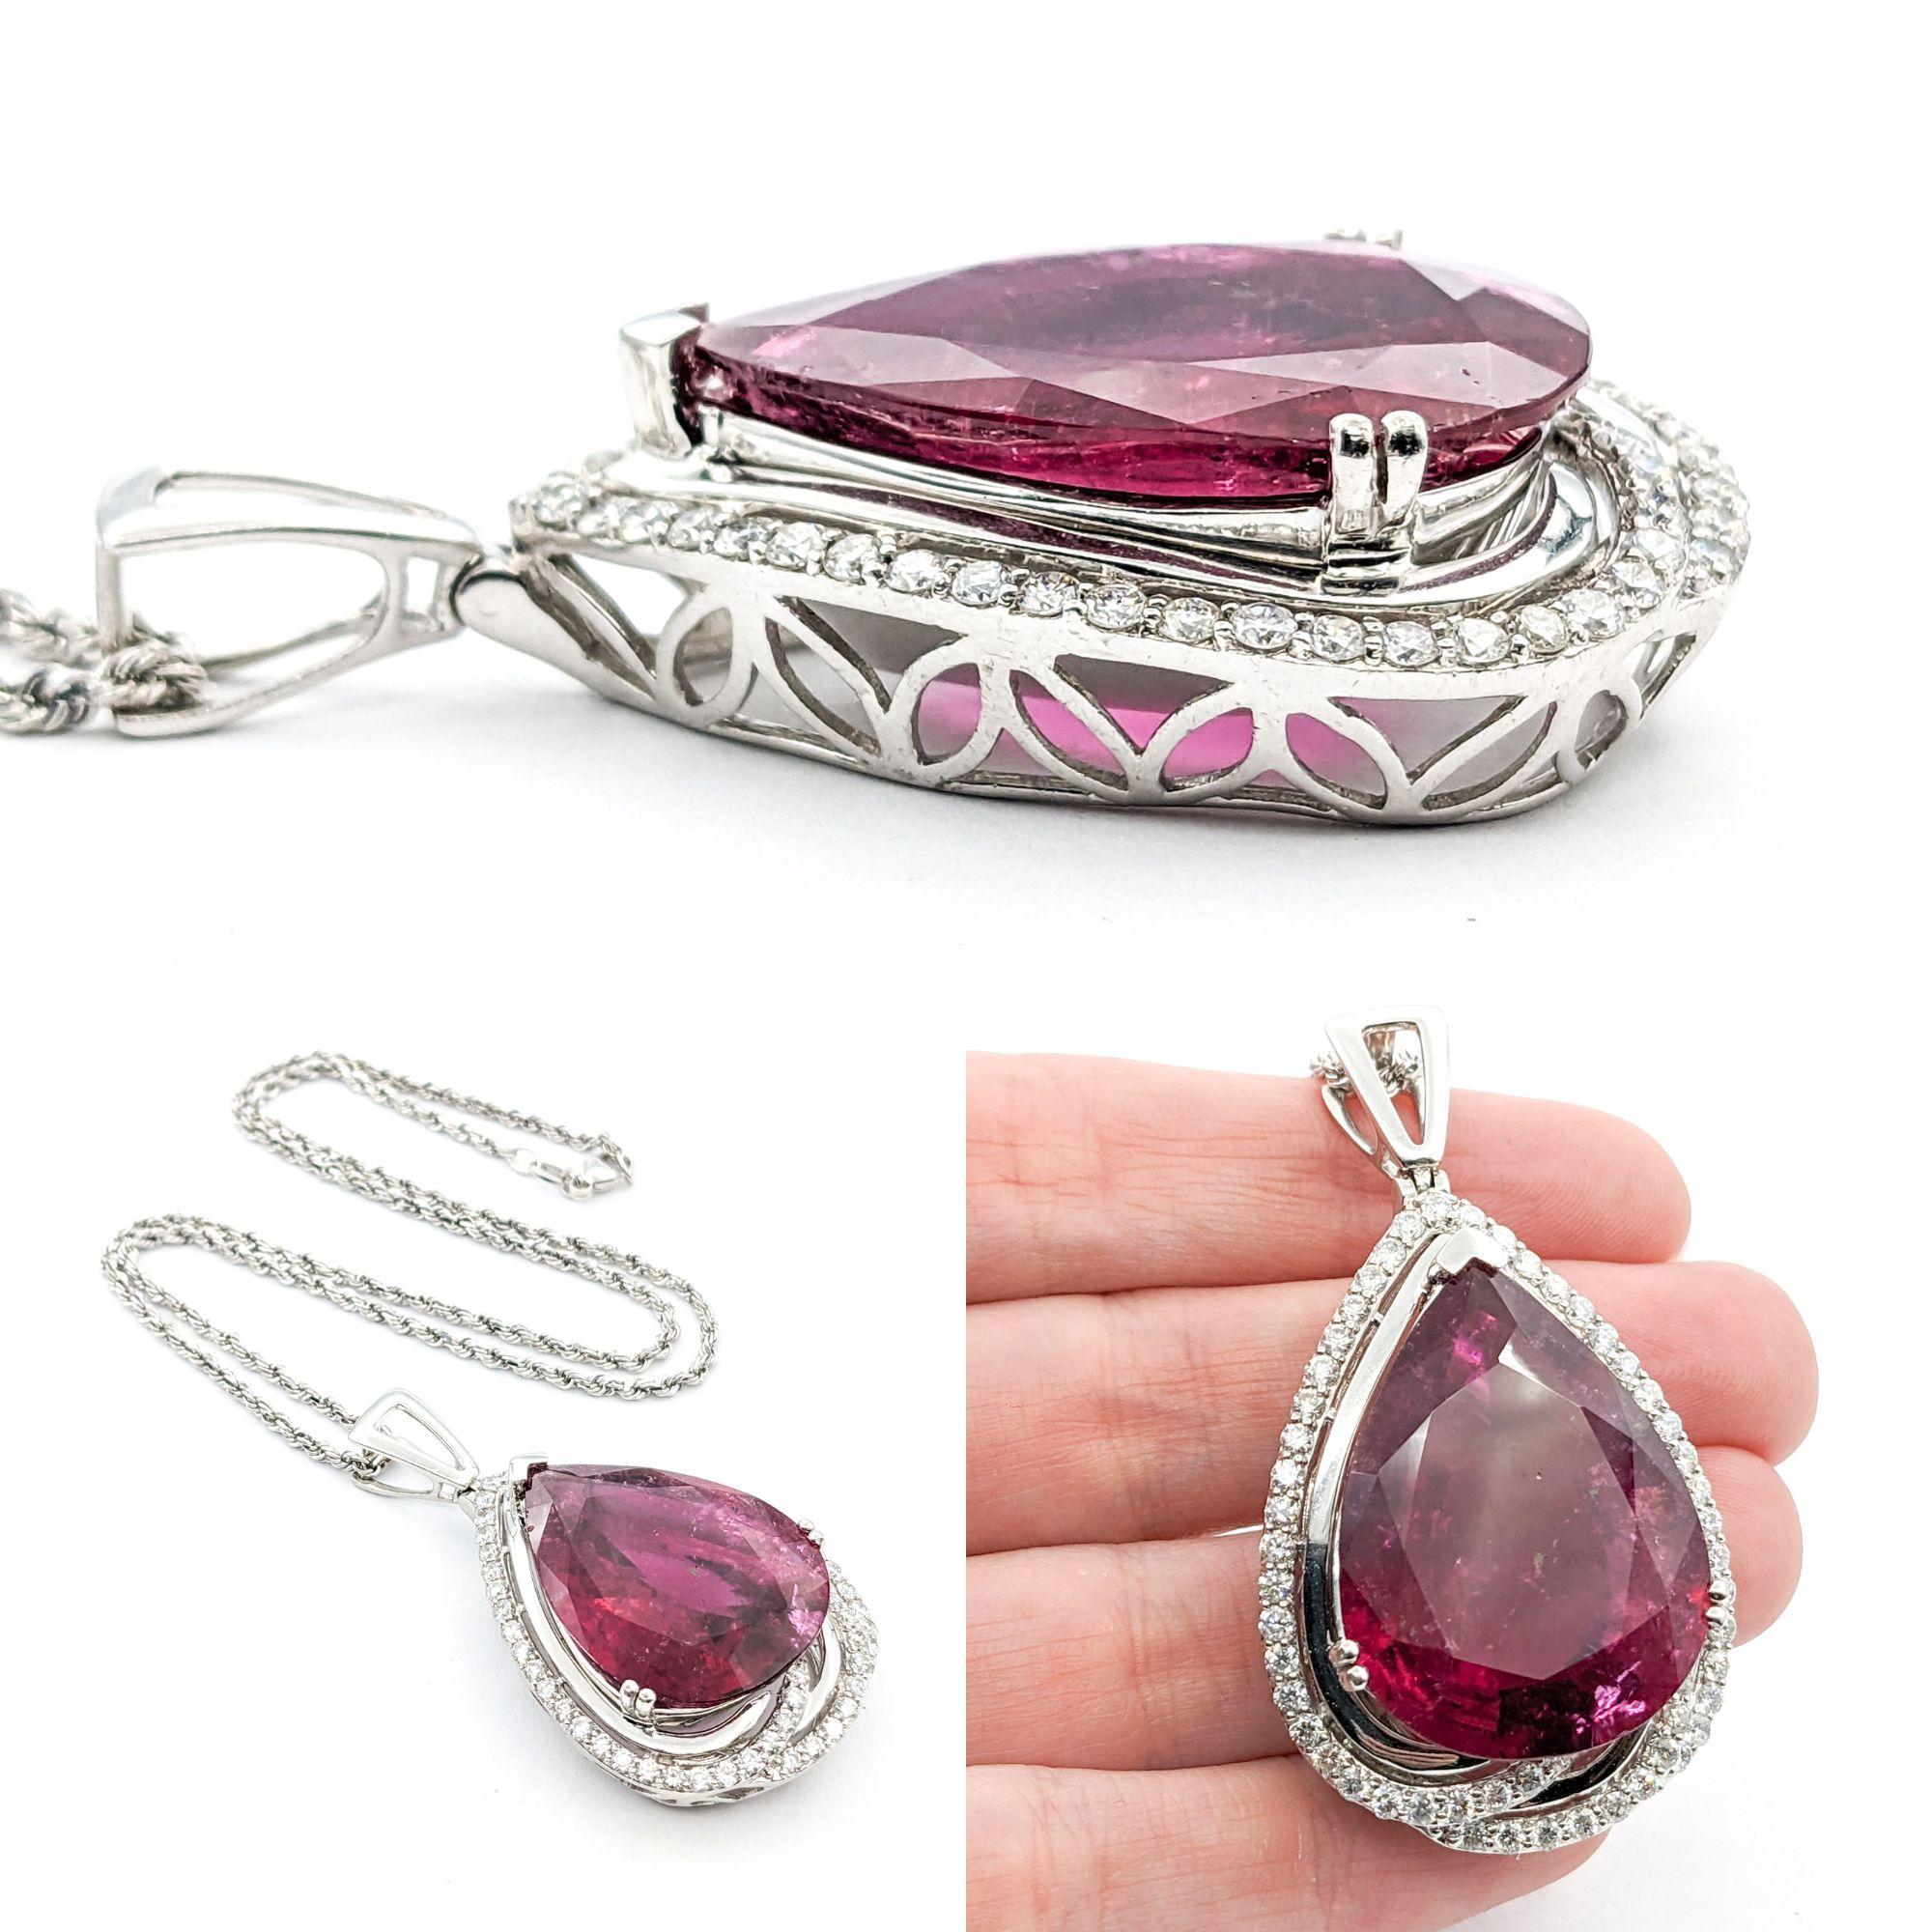 35.75ct Tourmaline & Diamond Necklace In Platinum


Introducing an exquisite Rubellite Tourmaline Necklace, expertly crafted in luxurious Platinum. This stunning piece features a captivating 35.75ct Natural Rubellite Tourmaline in the form of a